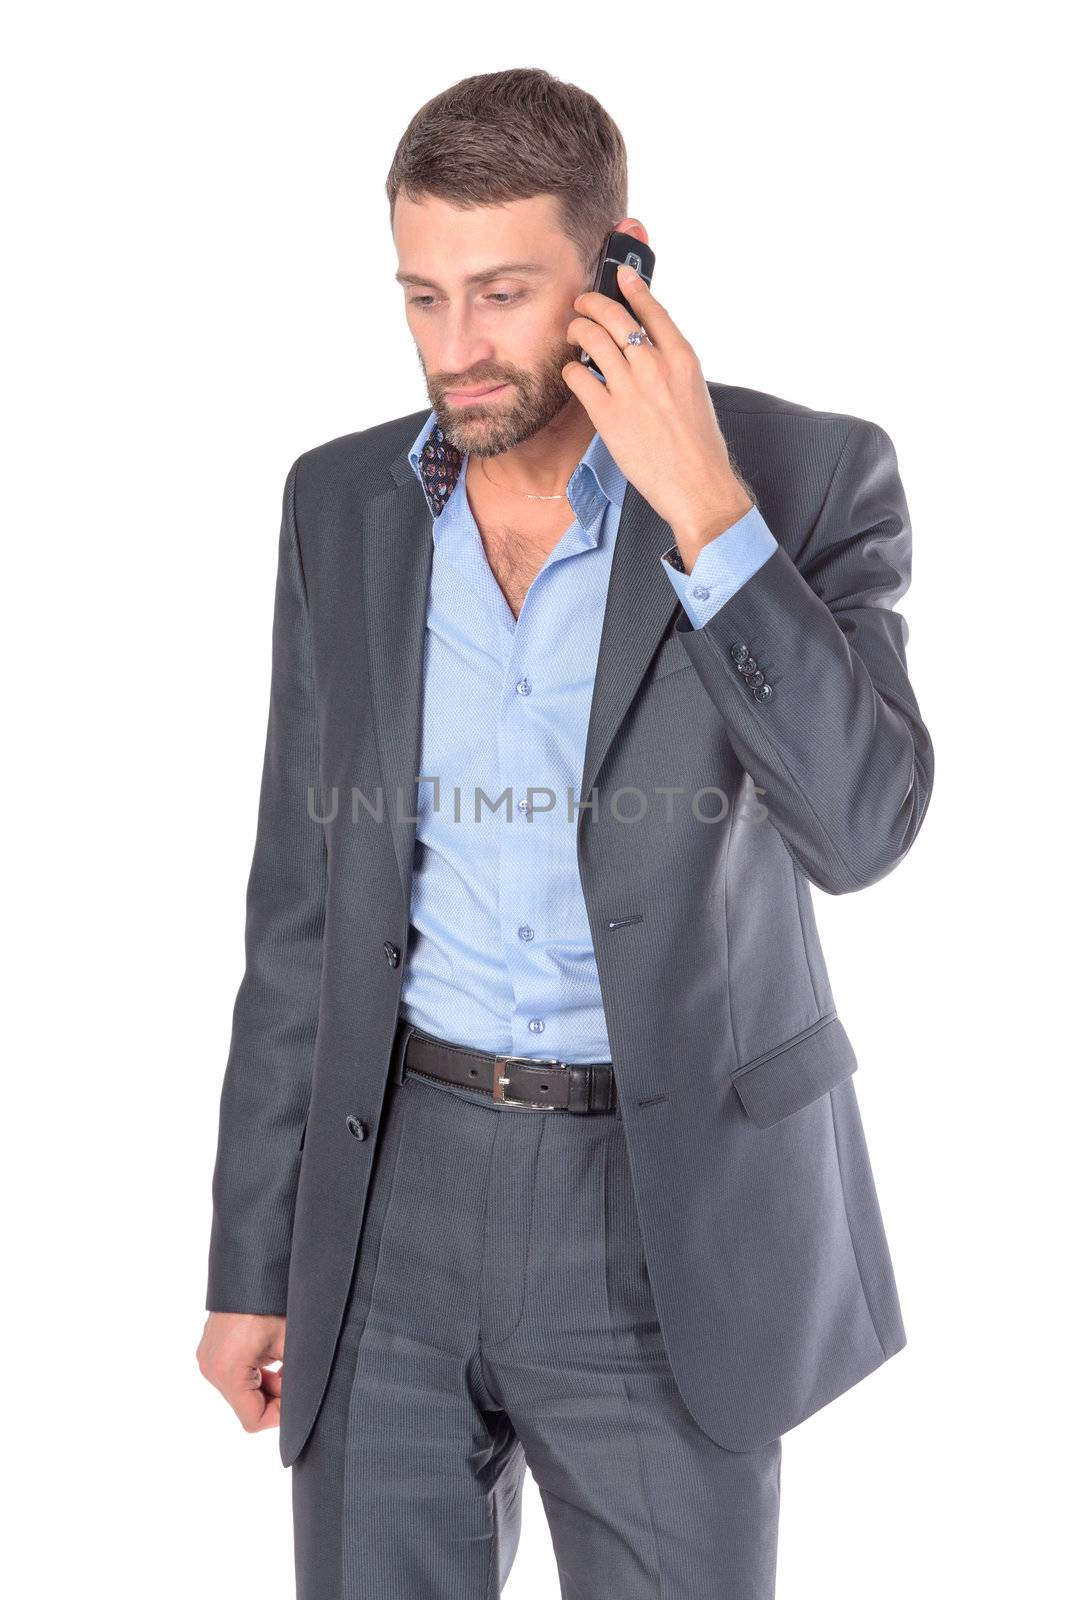 Portrait businessman with mobile phone by Discovod